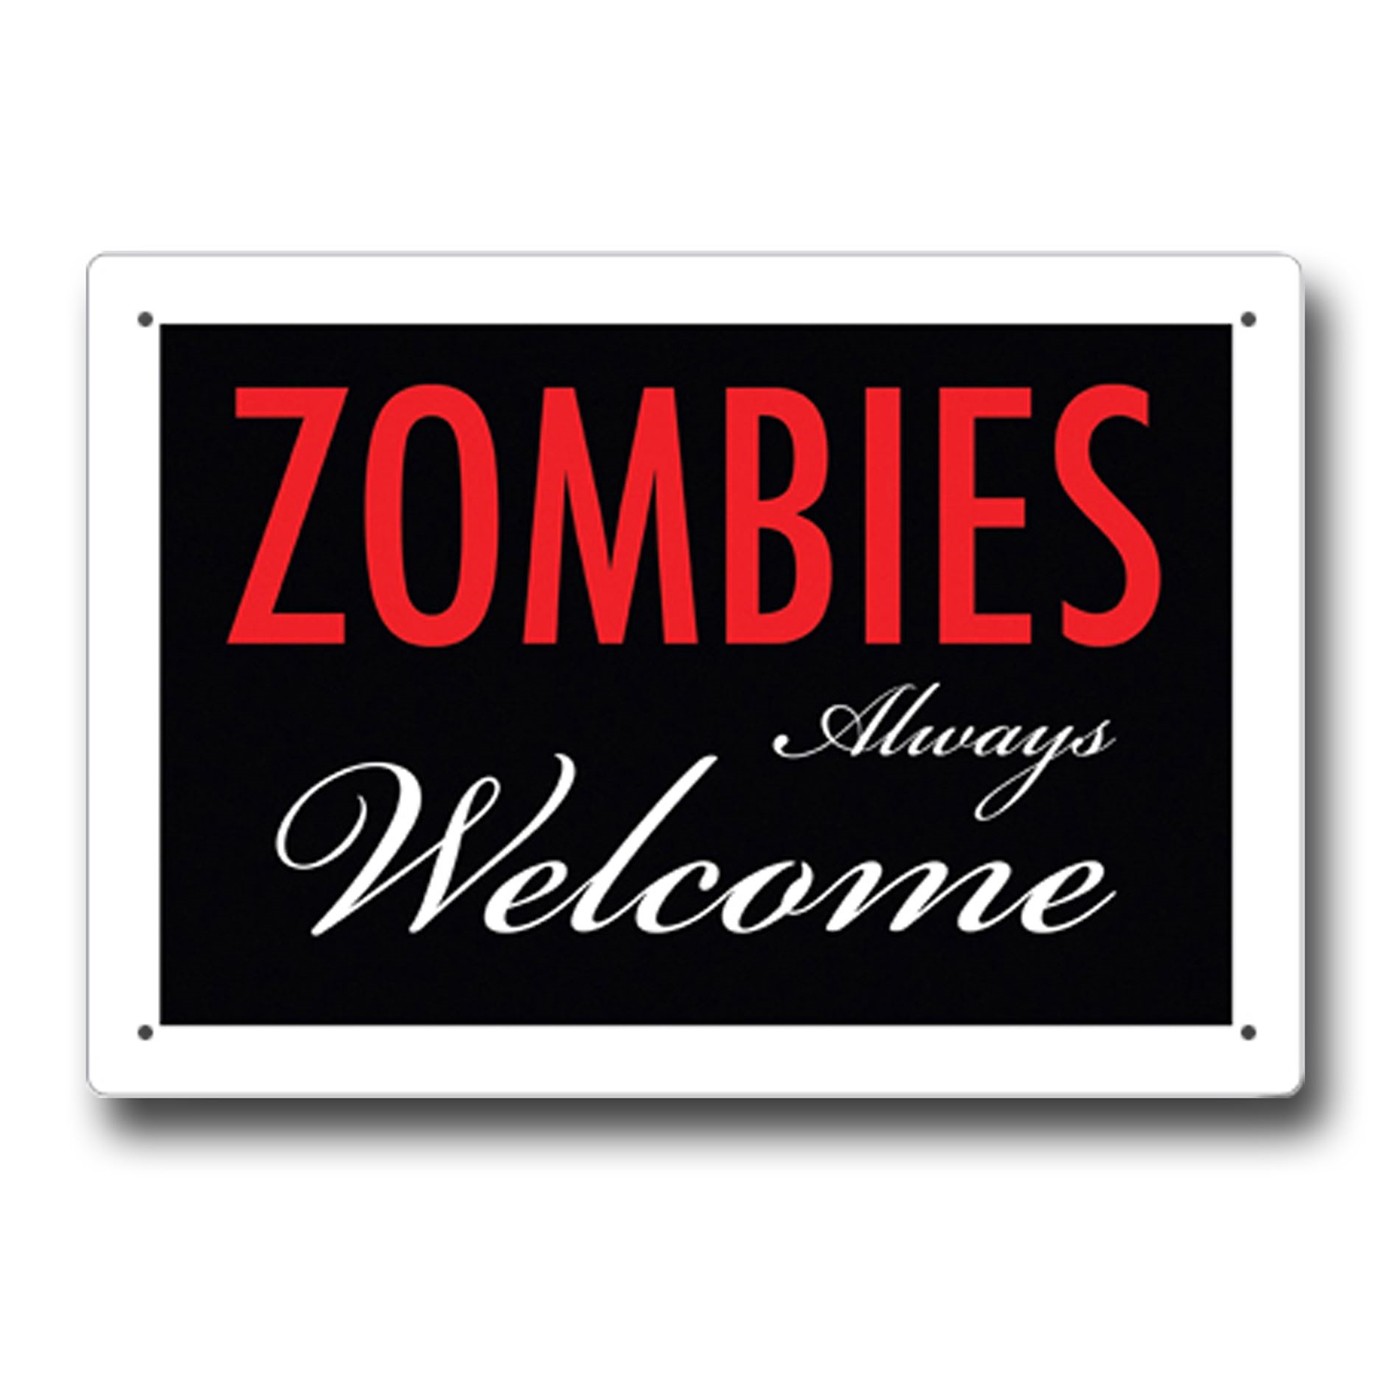 Zombies Always Welcome Tin Sign